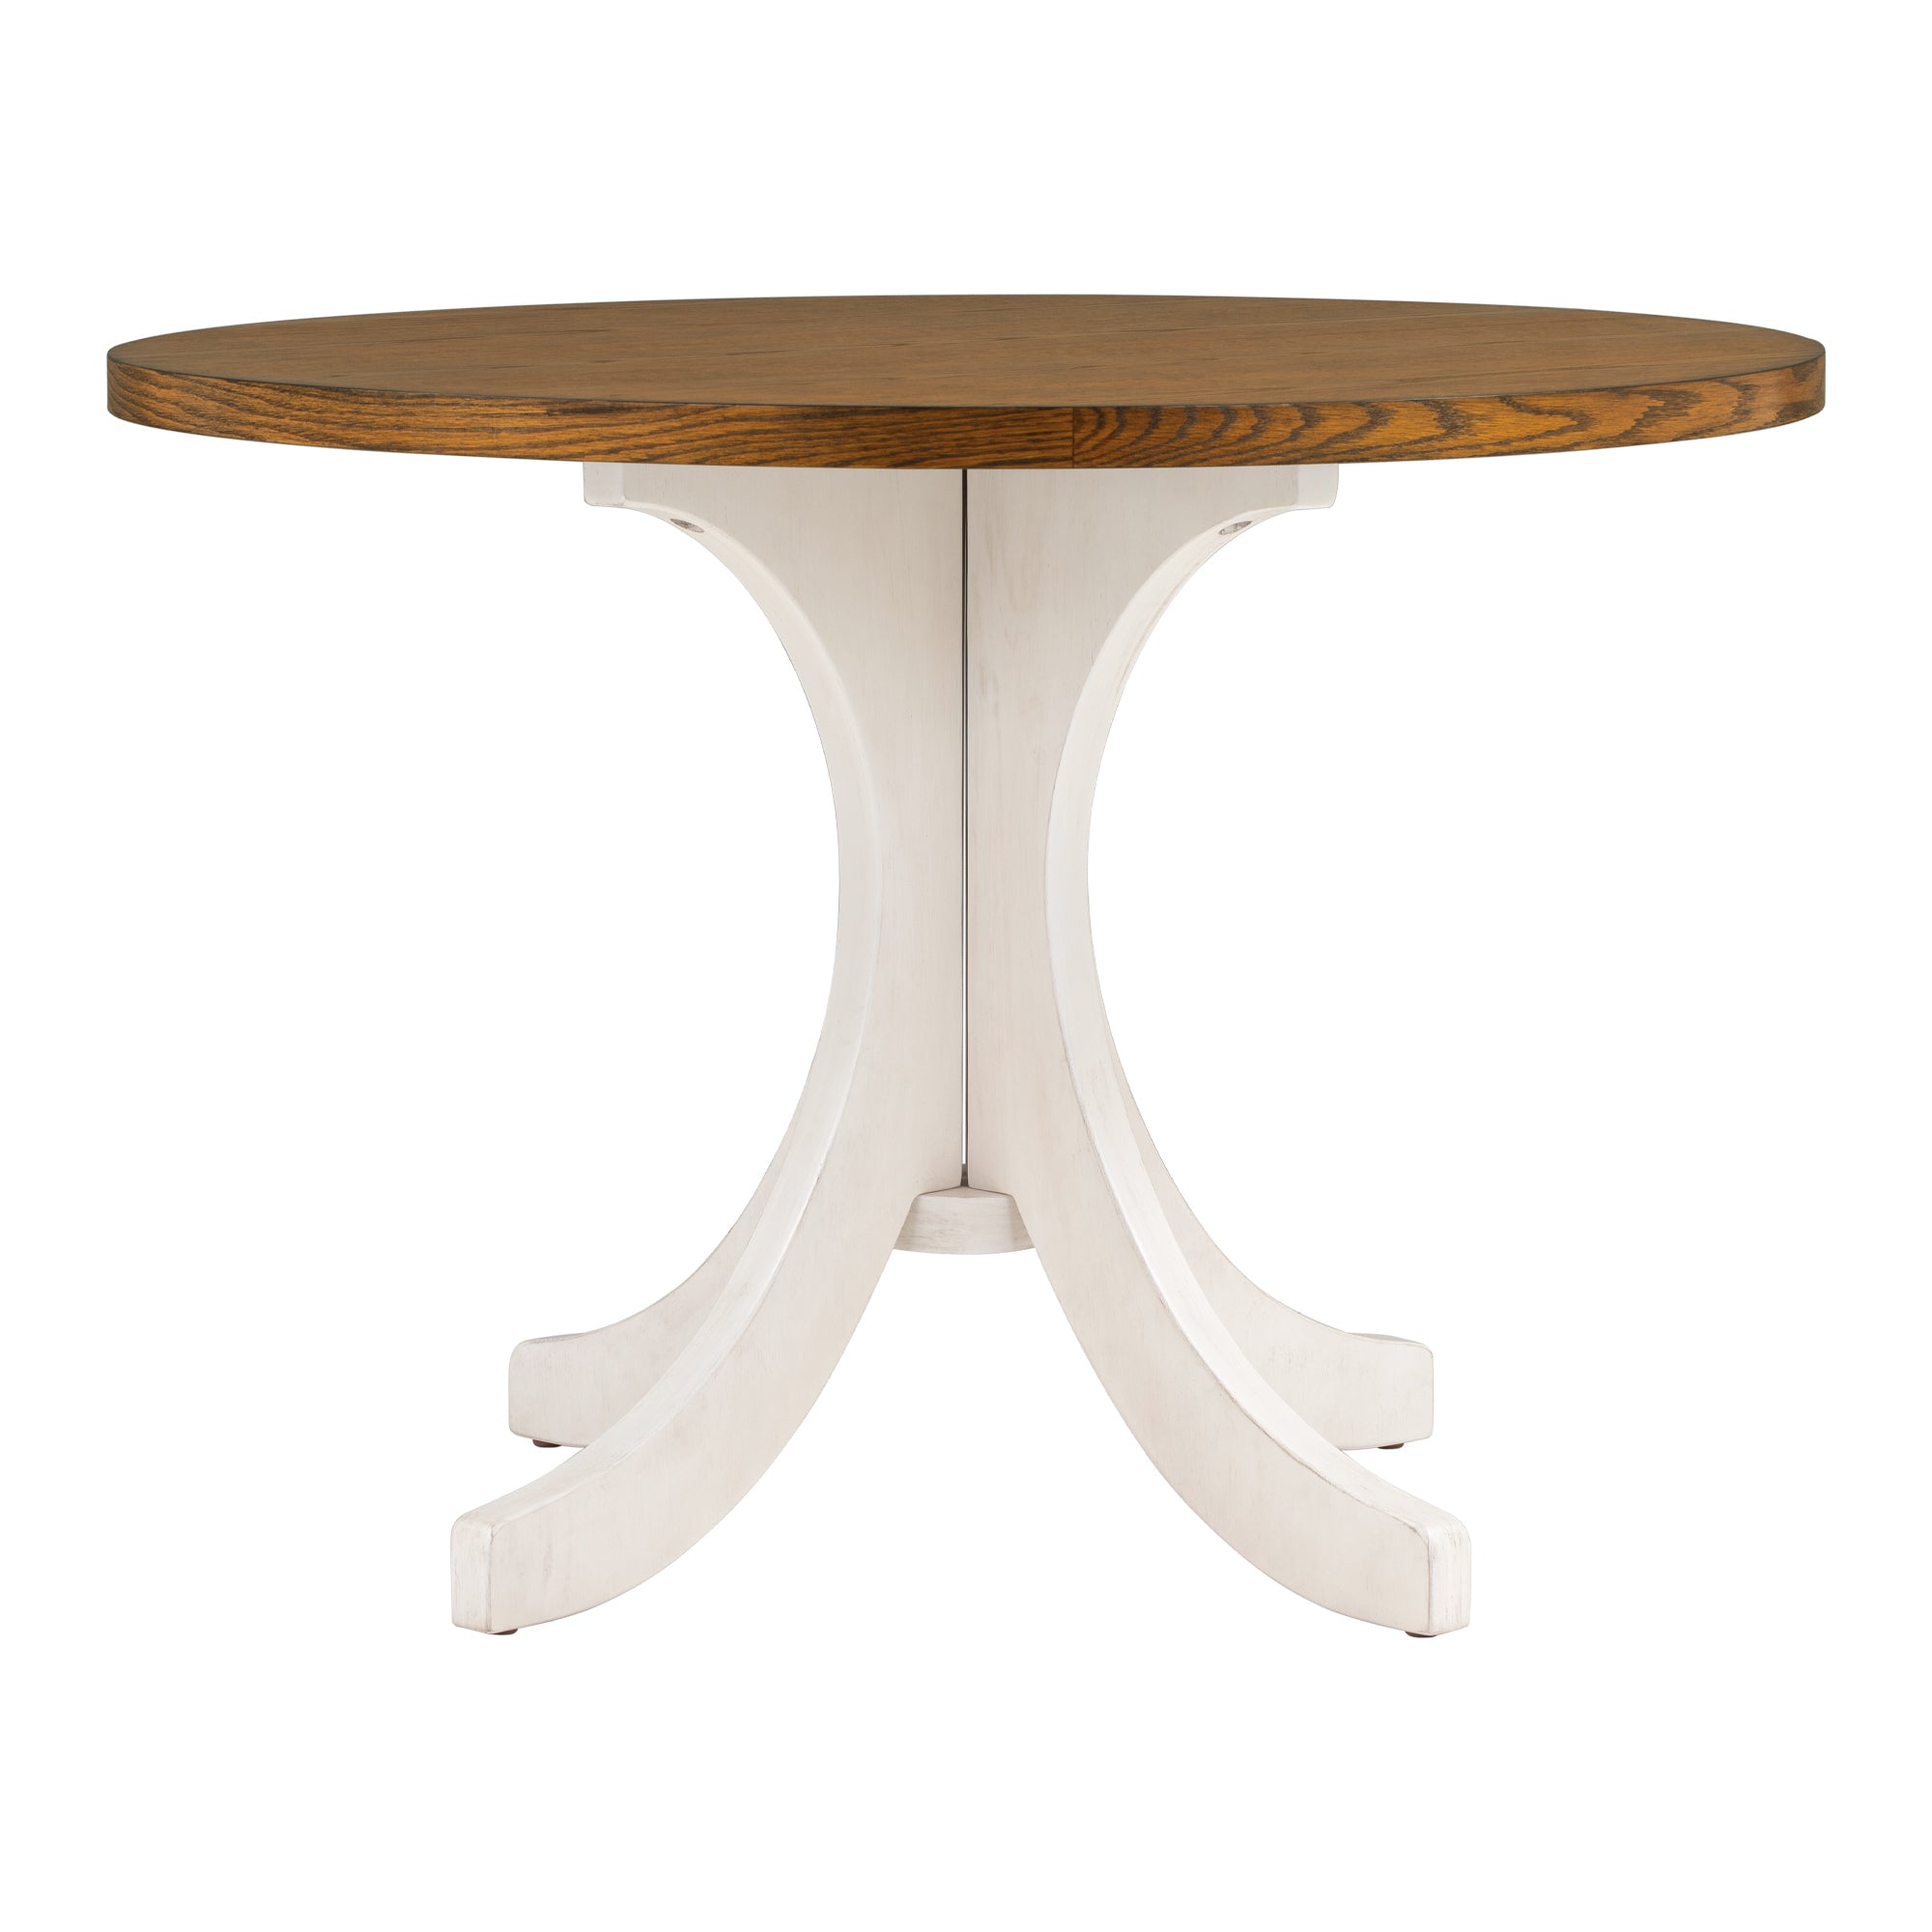 Mid Century Solid Wood Round Dining Table for walnut-dining room-rubberwood-round-kitchen &